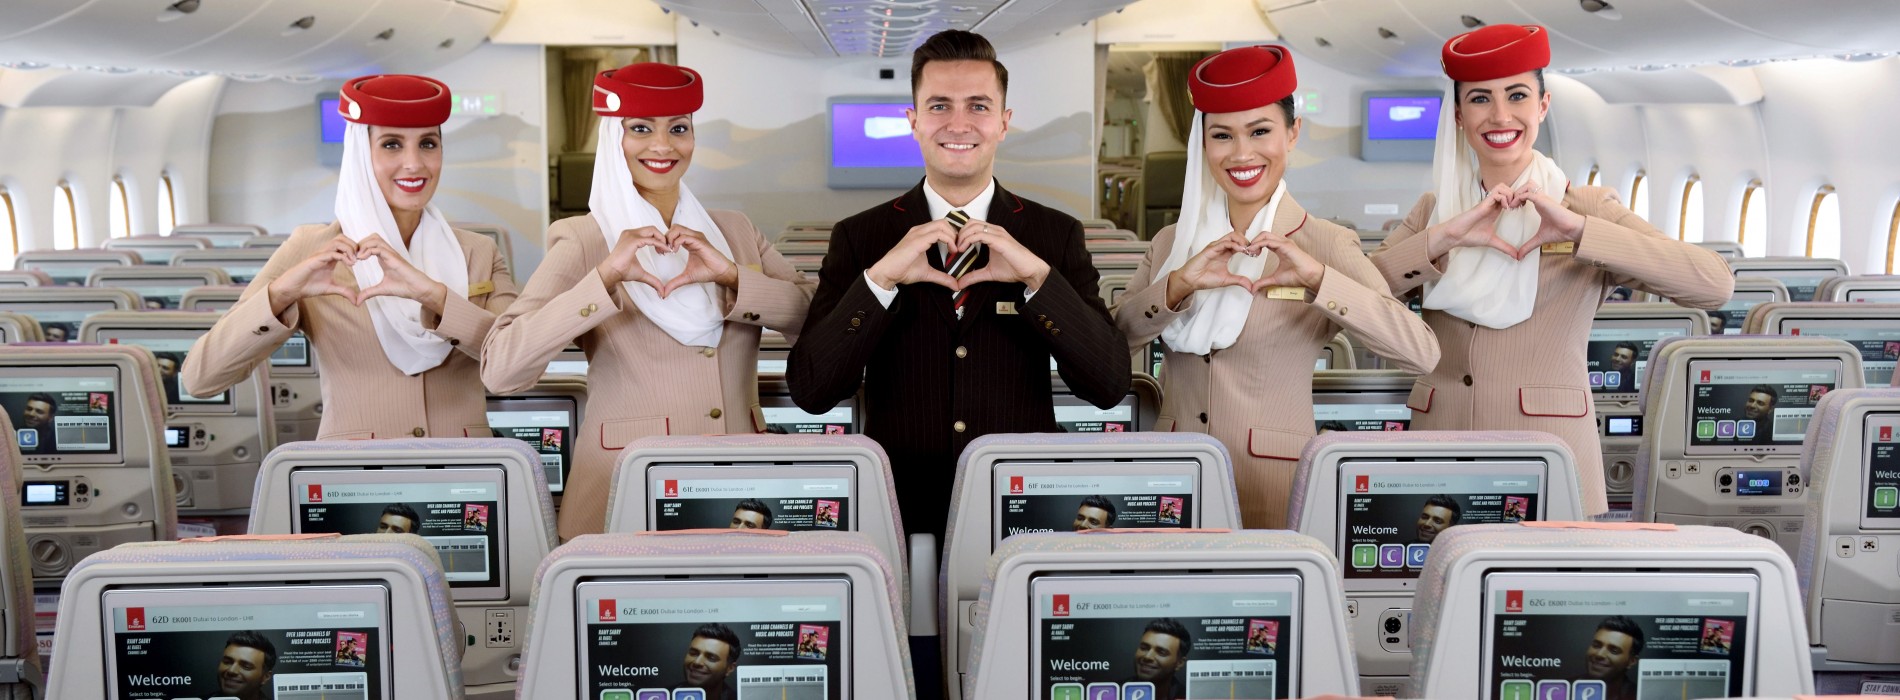 Emirates wins 14th consecutive World’s Best Inflight Entertainment award at Skytrax World Airline Awards 2018